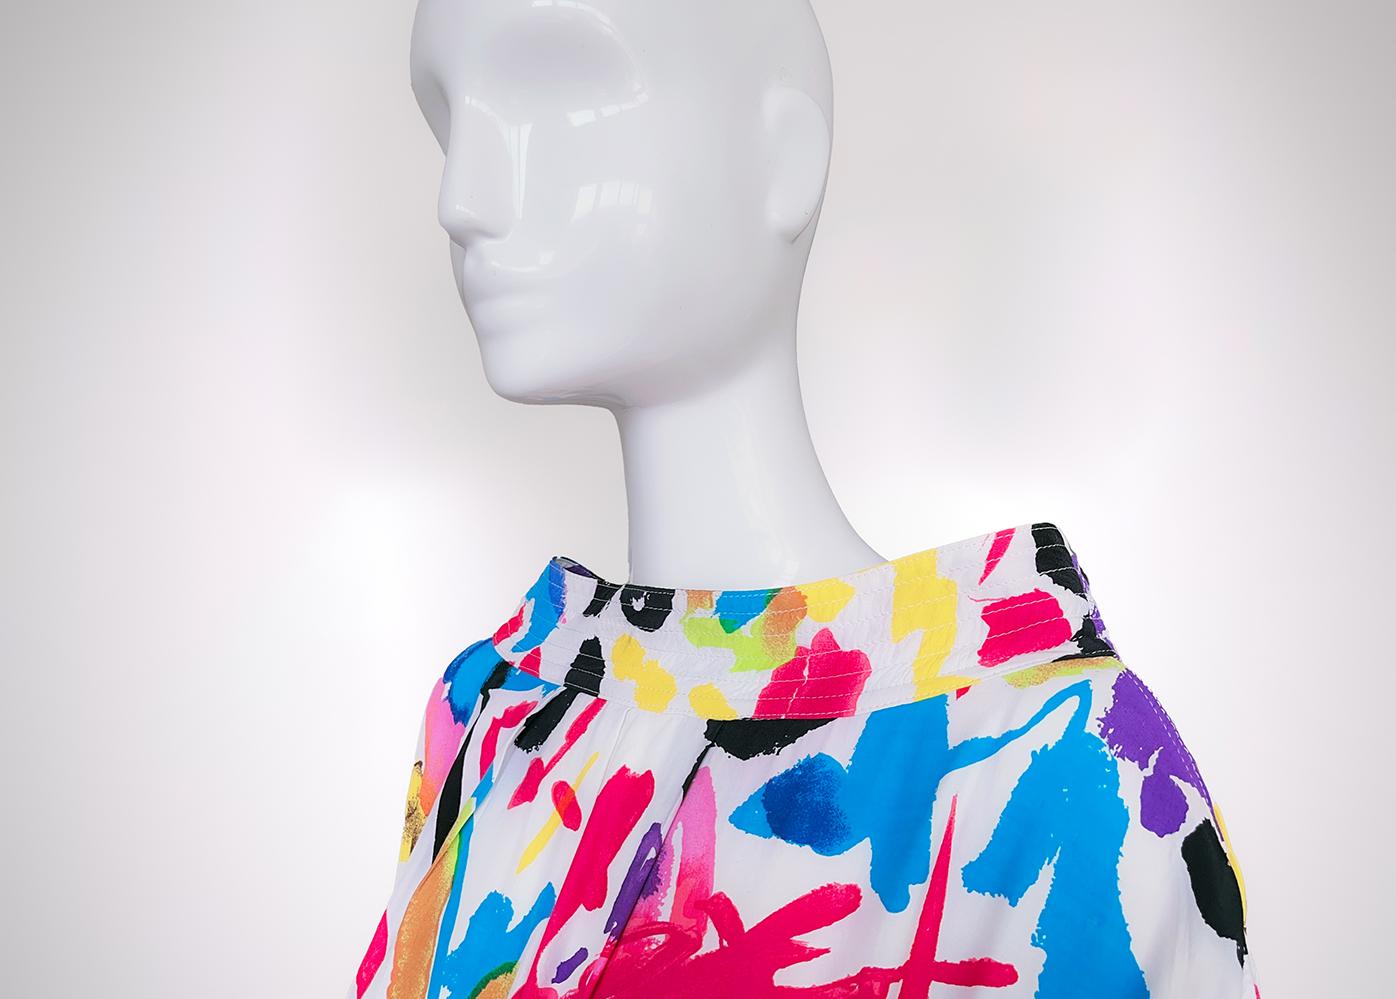 A very rare Thierry Mugler cotton dress, 1986 Collection. Typical 80s abstract pattern. 
Love these vibrant colorus and the simple minimal but also beautifully designed shape of the dress. The boat neck collar is fabulous. It closes all the way with